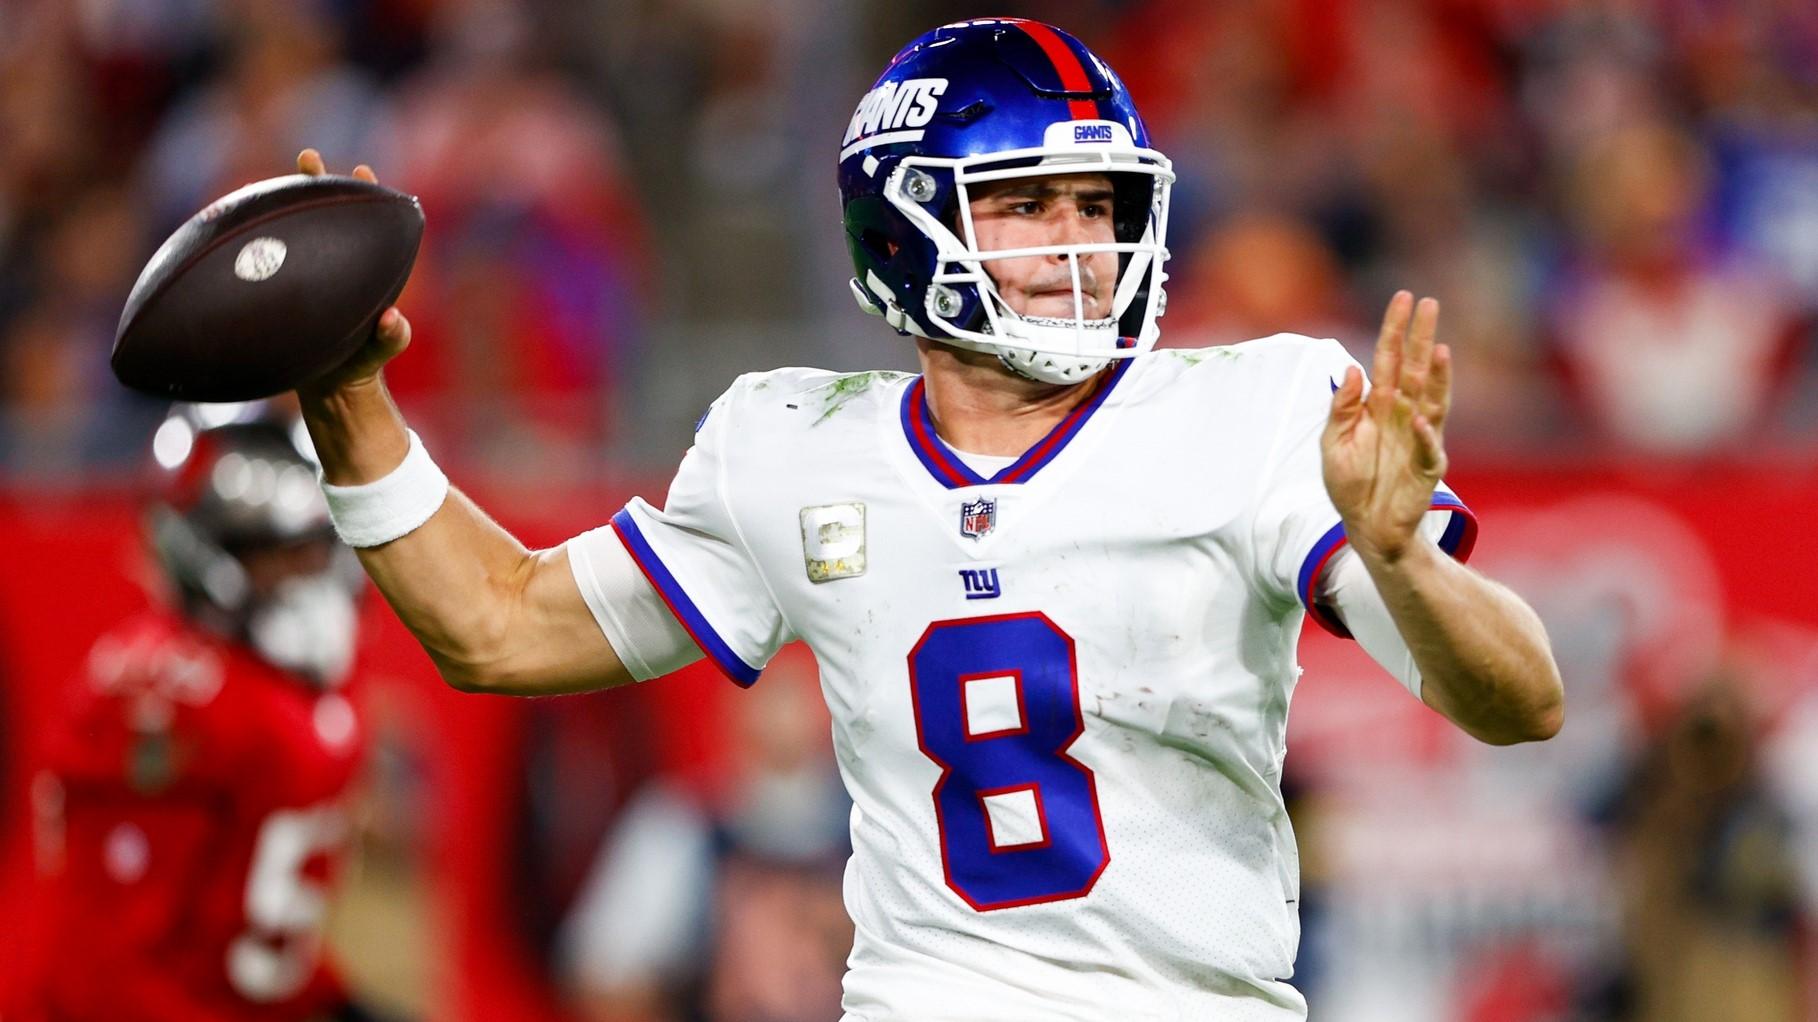 Nov 22, 2021; Tampa, Florida, USA; New York Giants quarterback Daniel Jones (8) throws a pass in the second half against the Tampa Bay Buccaneers at Raymond James Stadium. / Nathan Ray Seebeck-USA TODAY Sports